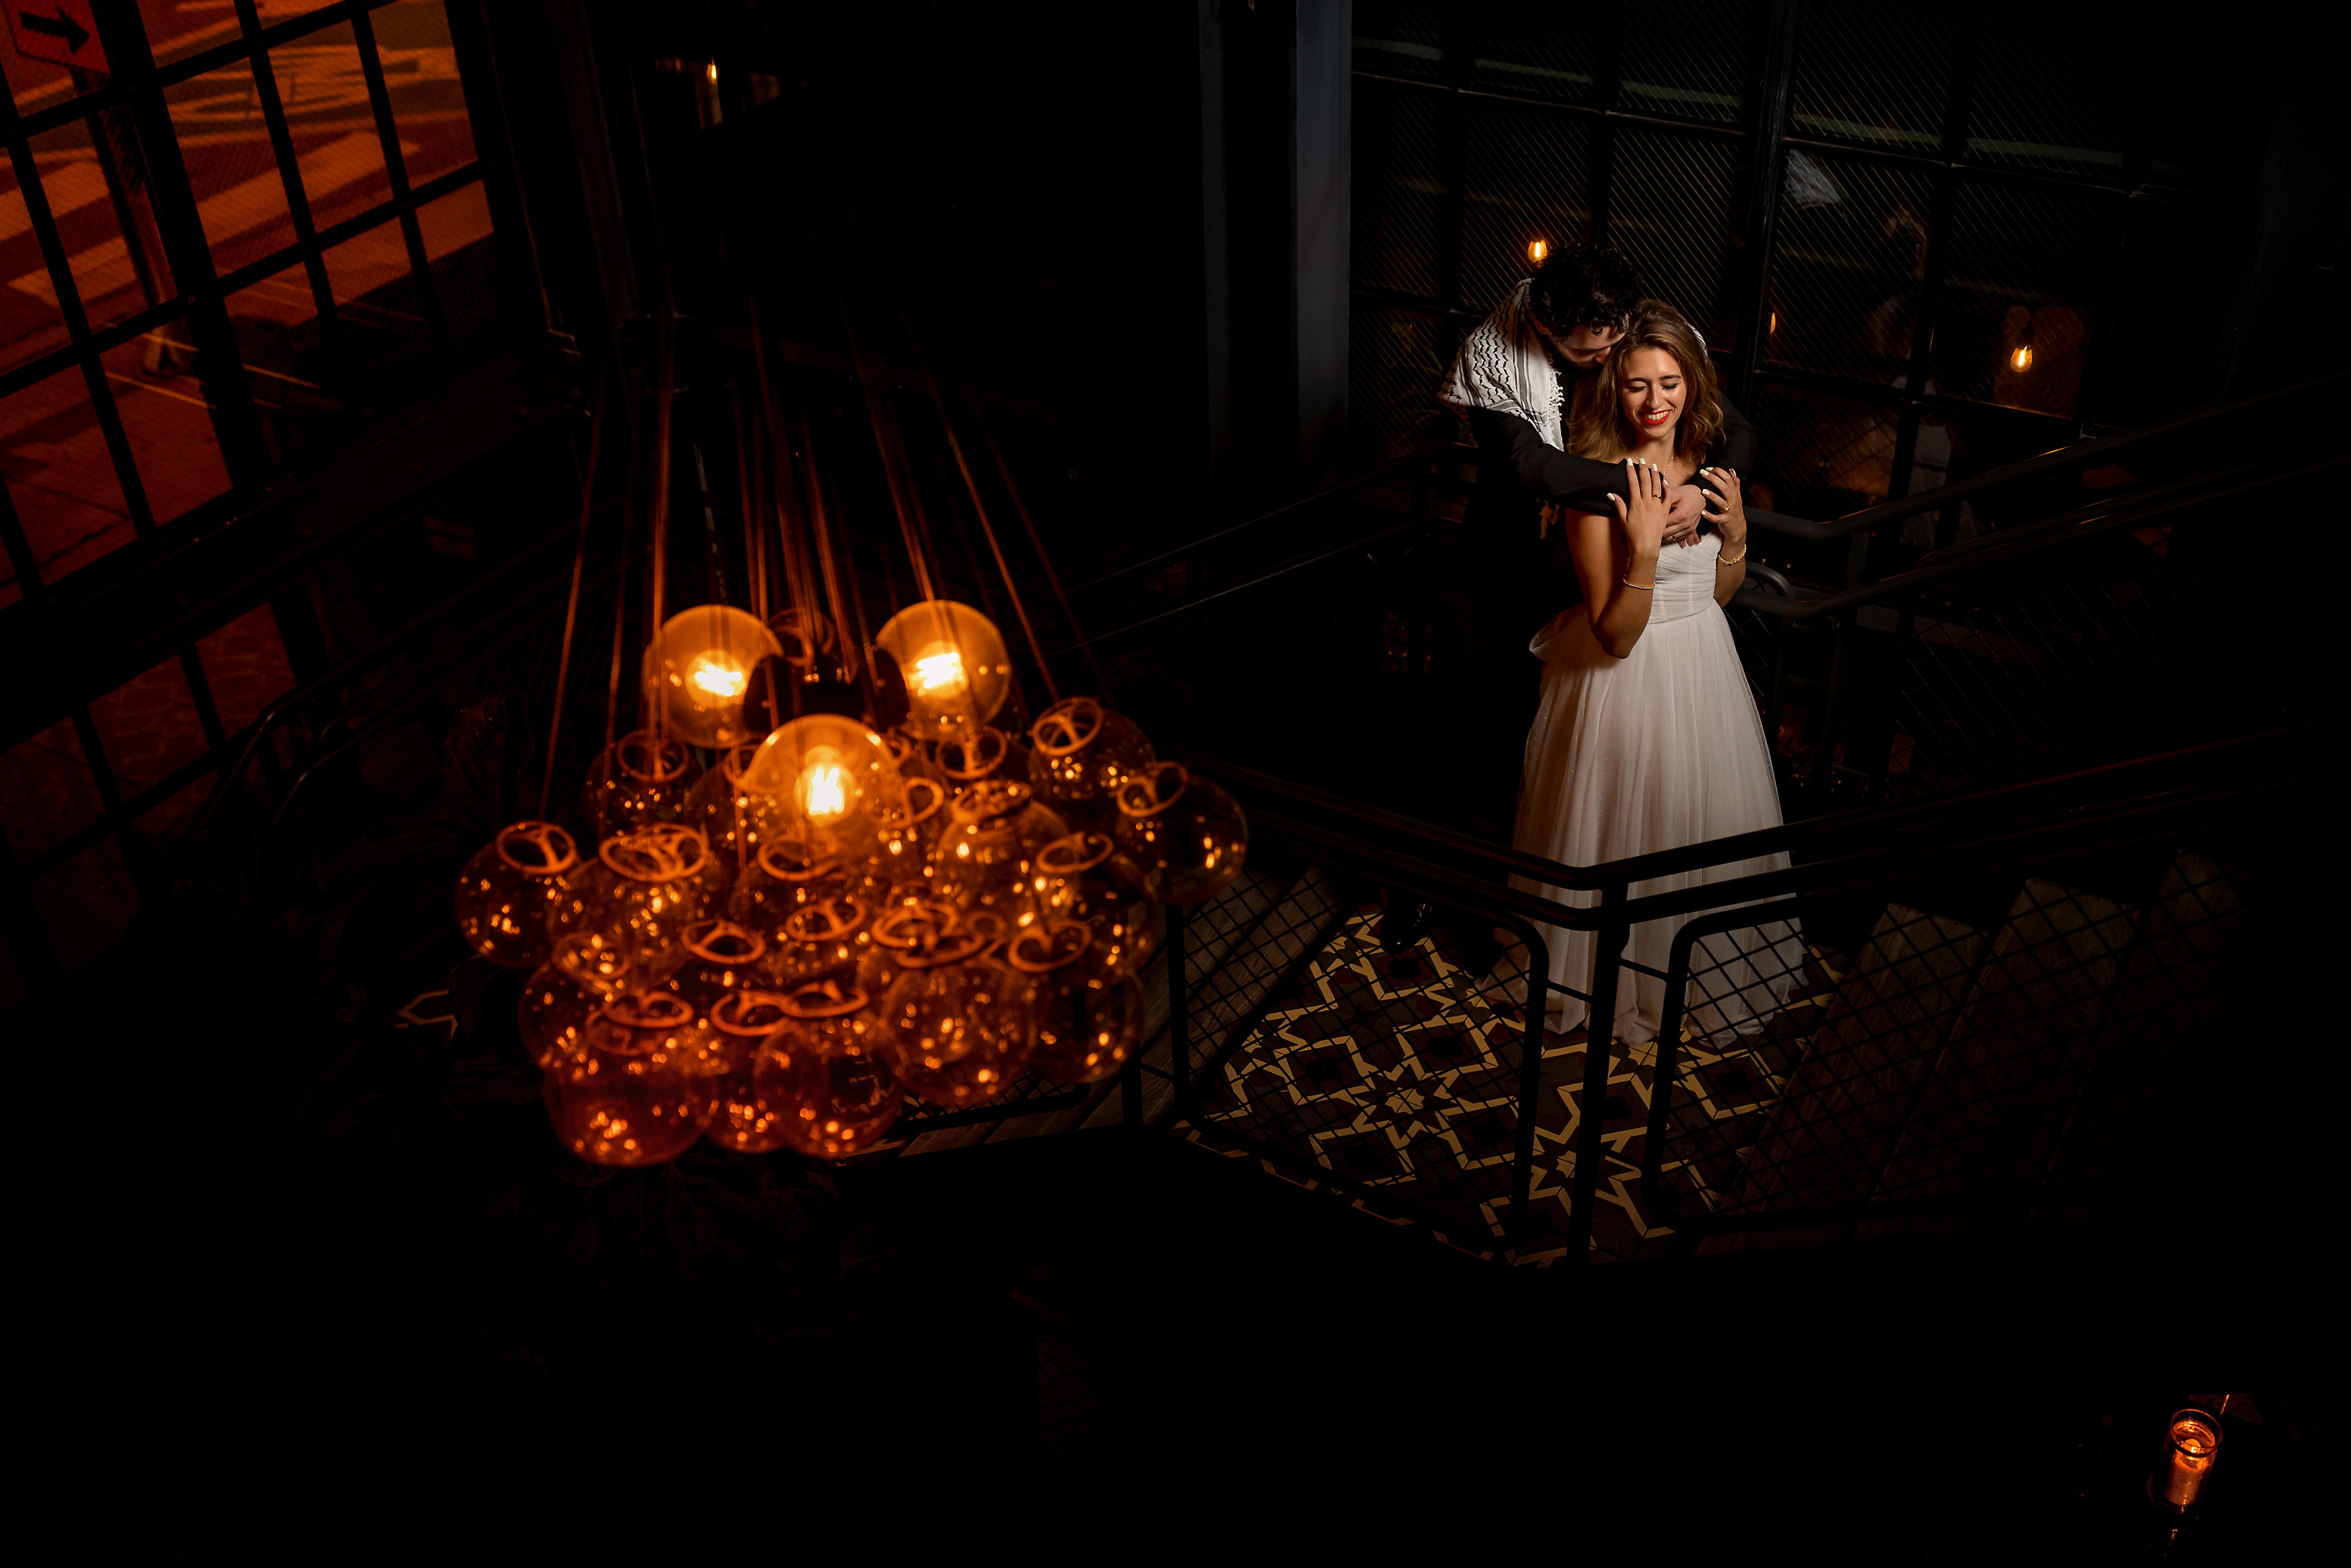 Couple poses for photo on the staircase during wedding reception at The Dawson restaurant in downtown Chicago